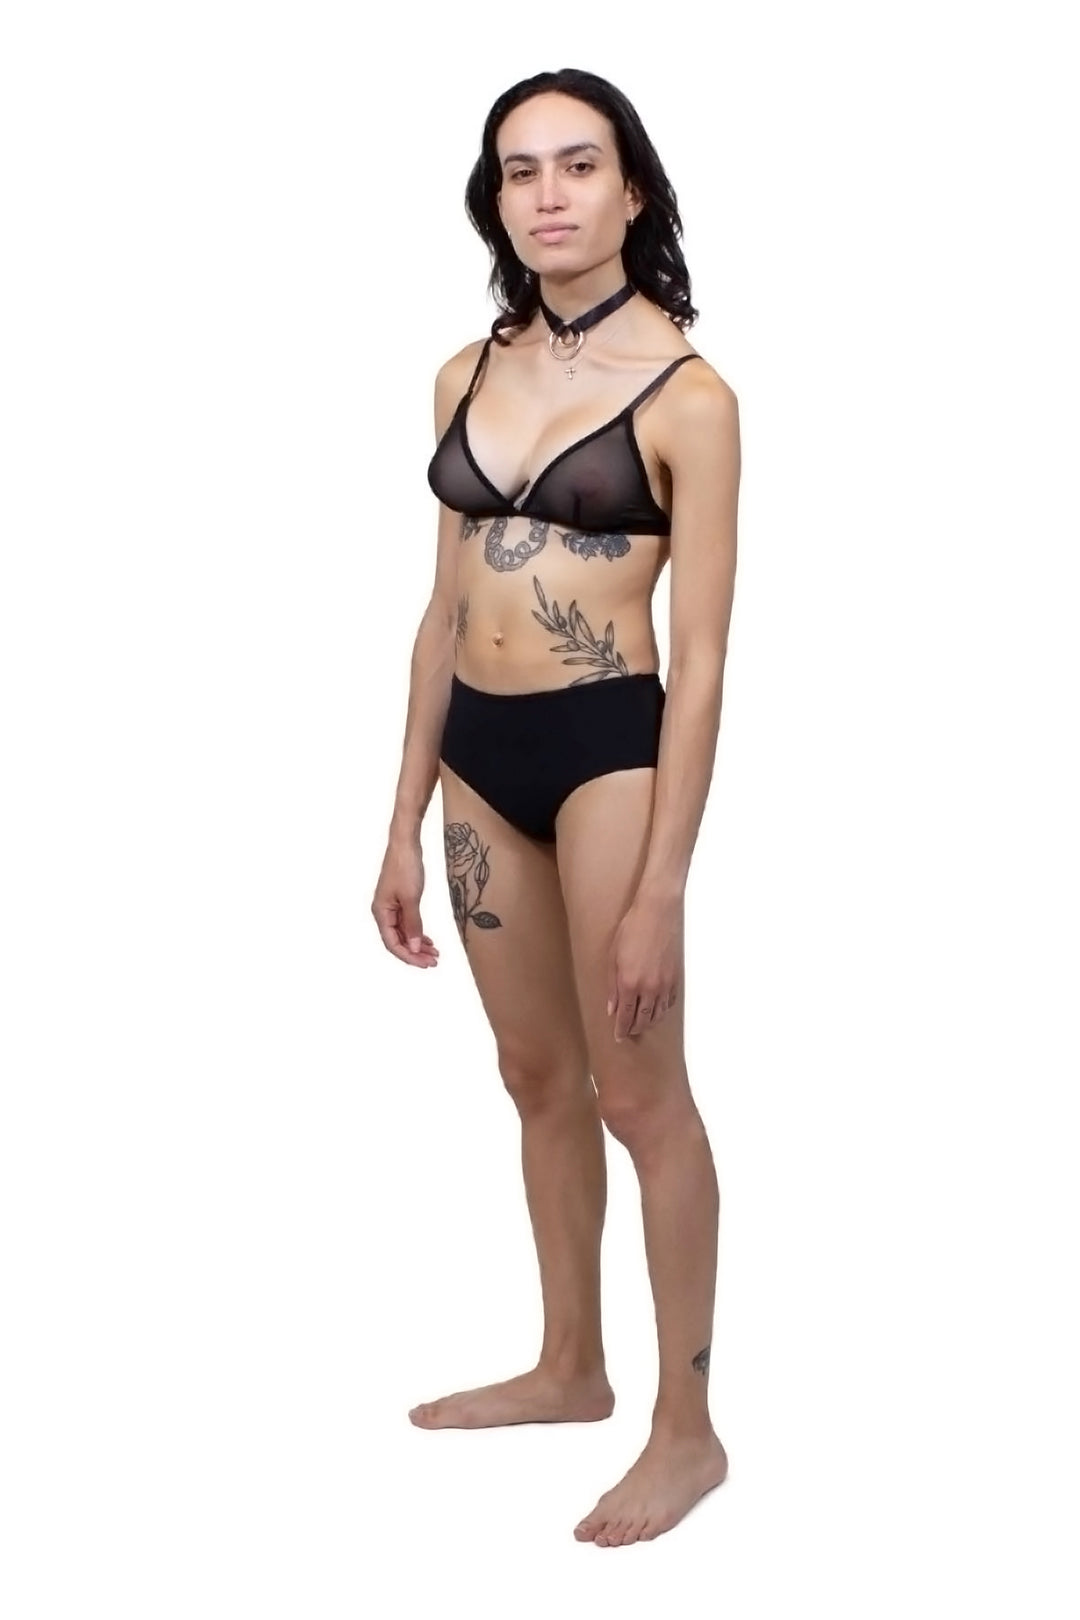 Transfemme person wearing a black tucking underwear compression gaff with a boyshort cut with a mesh bra, photographed from the left side.